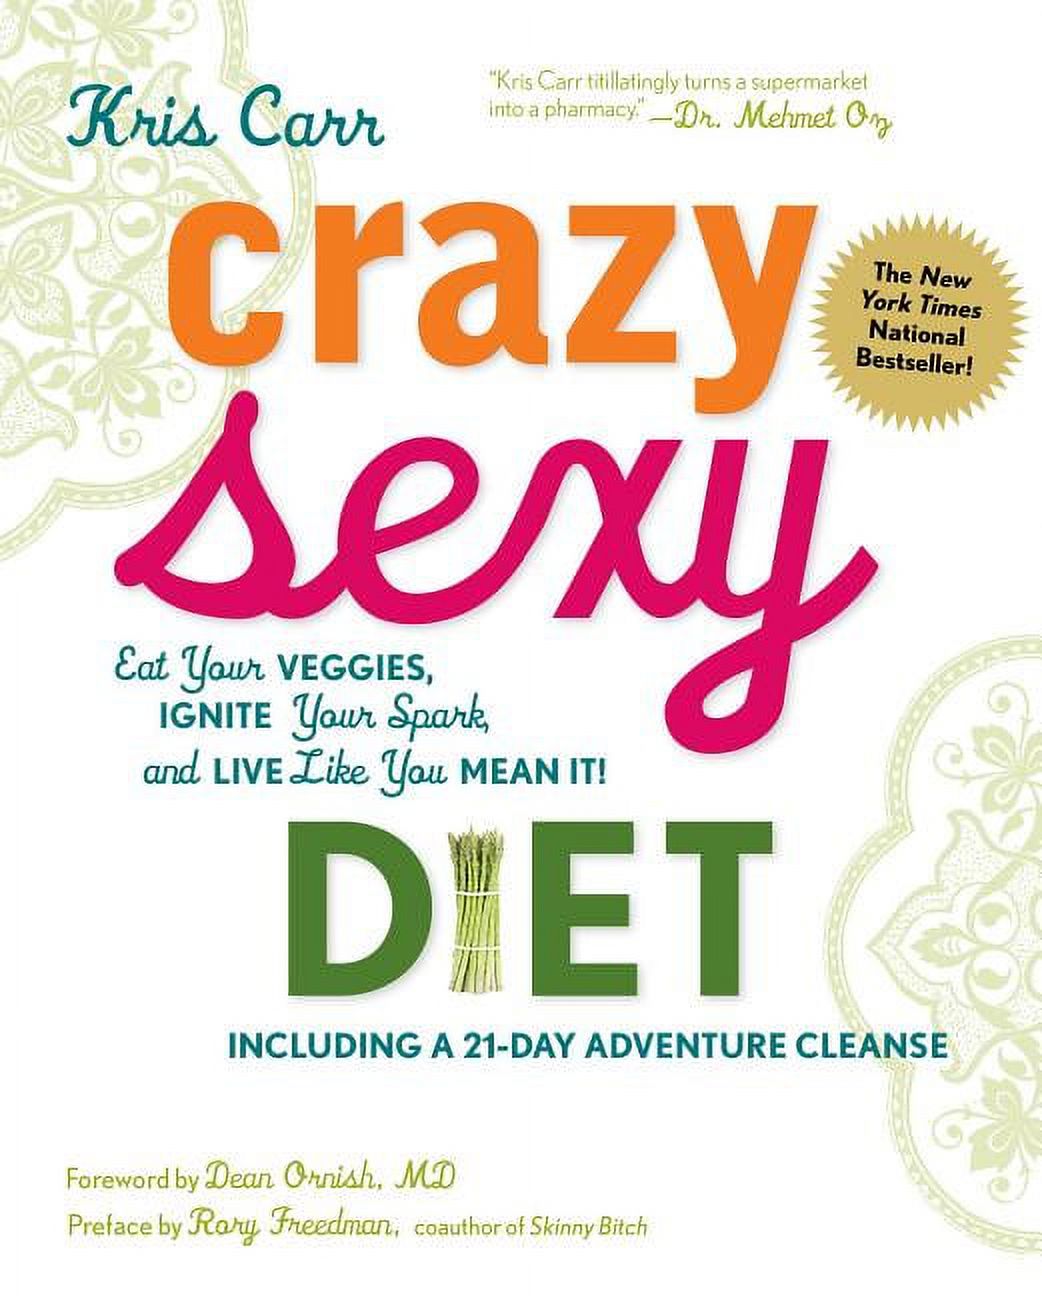 Crazy Sexy Diet : Eat Your Veggies, Ignite Your Spark, And Live Like You Mean It! (Edition 1) (Hardcover) - image 1 of 1